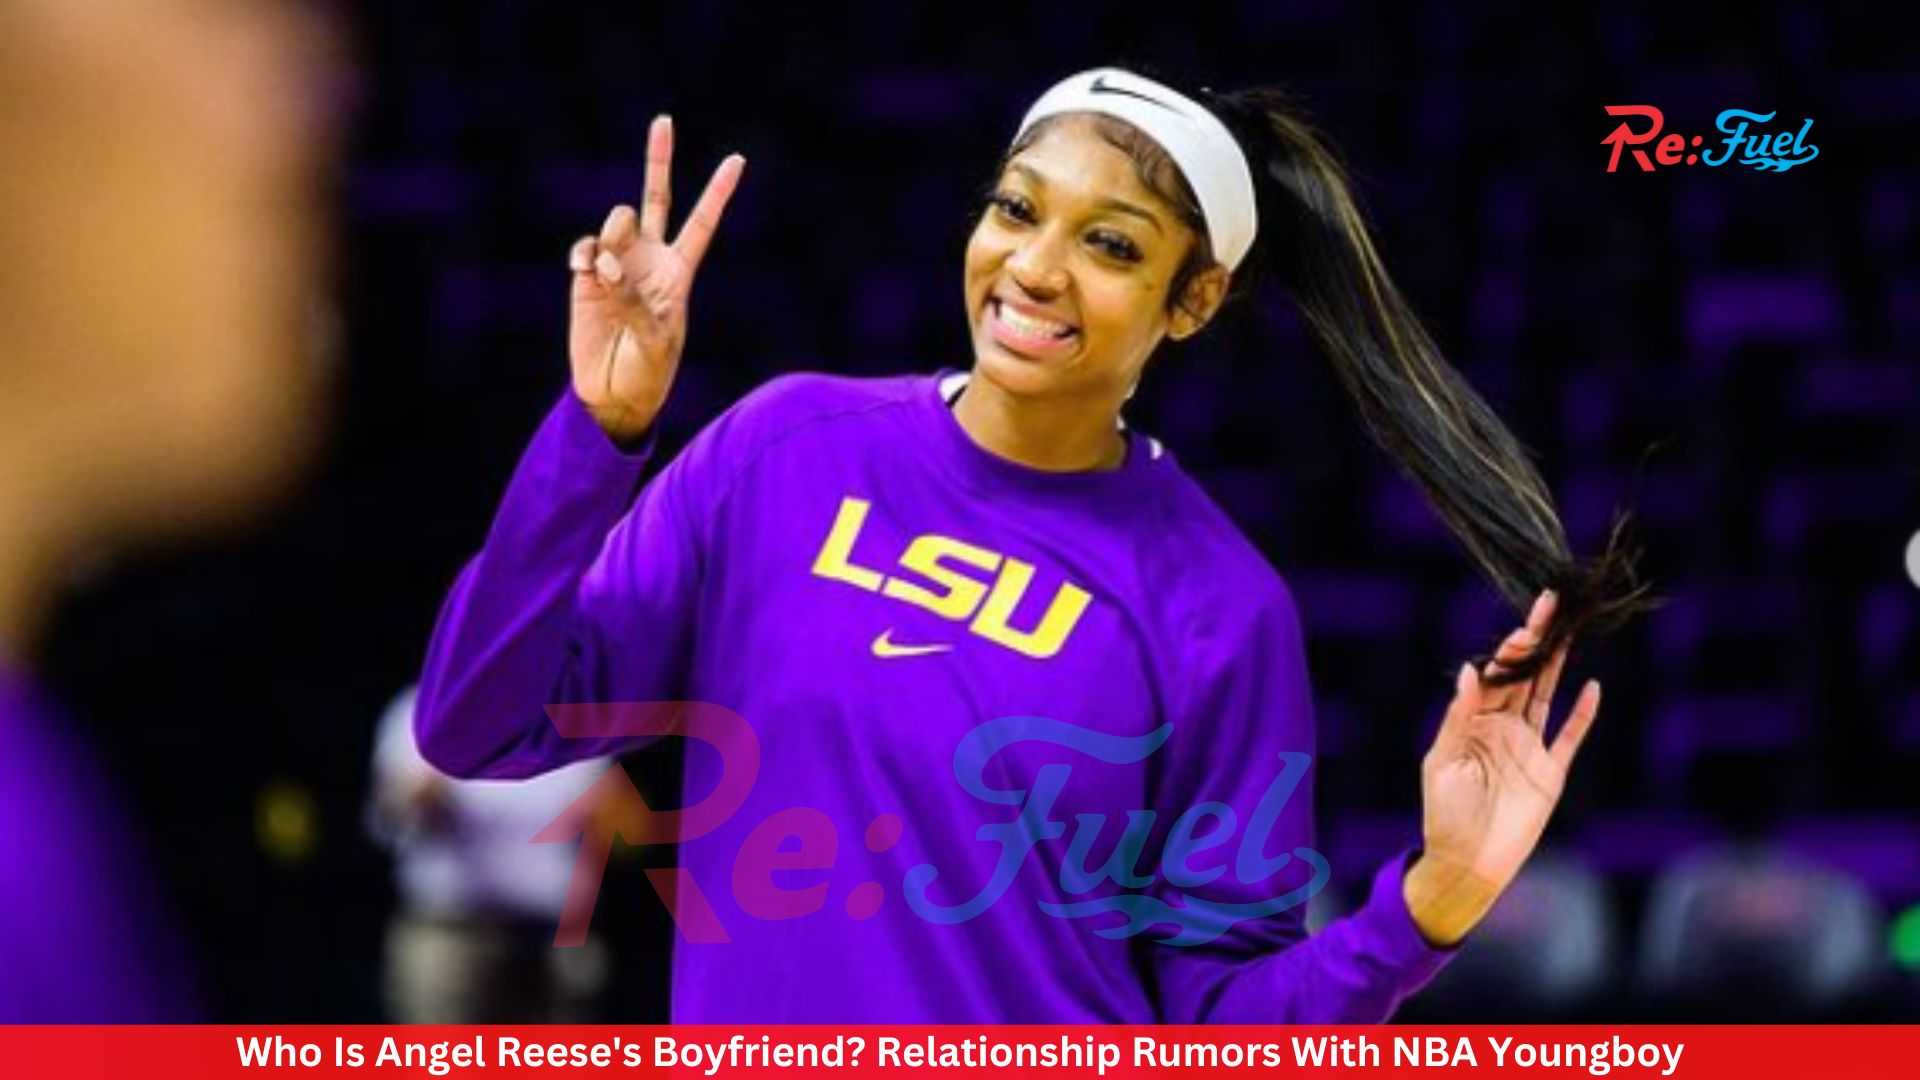 Who Is Angel Reese's Boyfriend? Relationship Rumors With NBA Youngboy